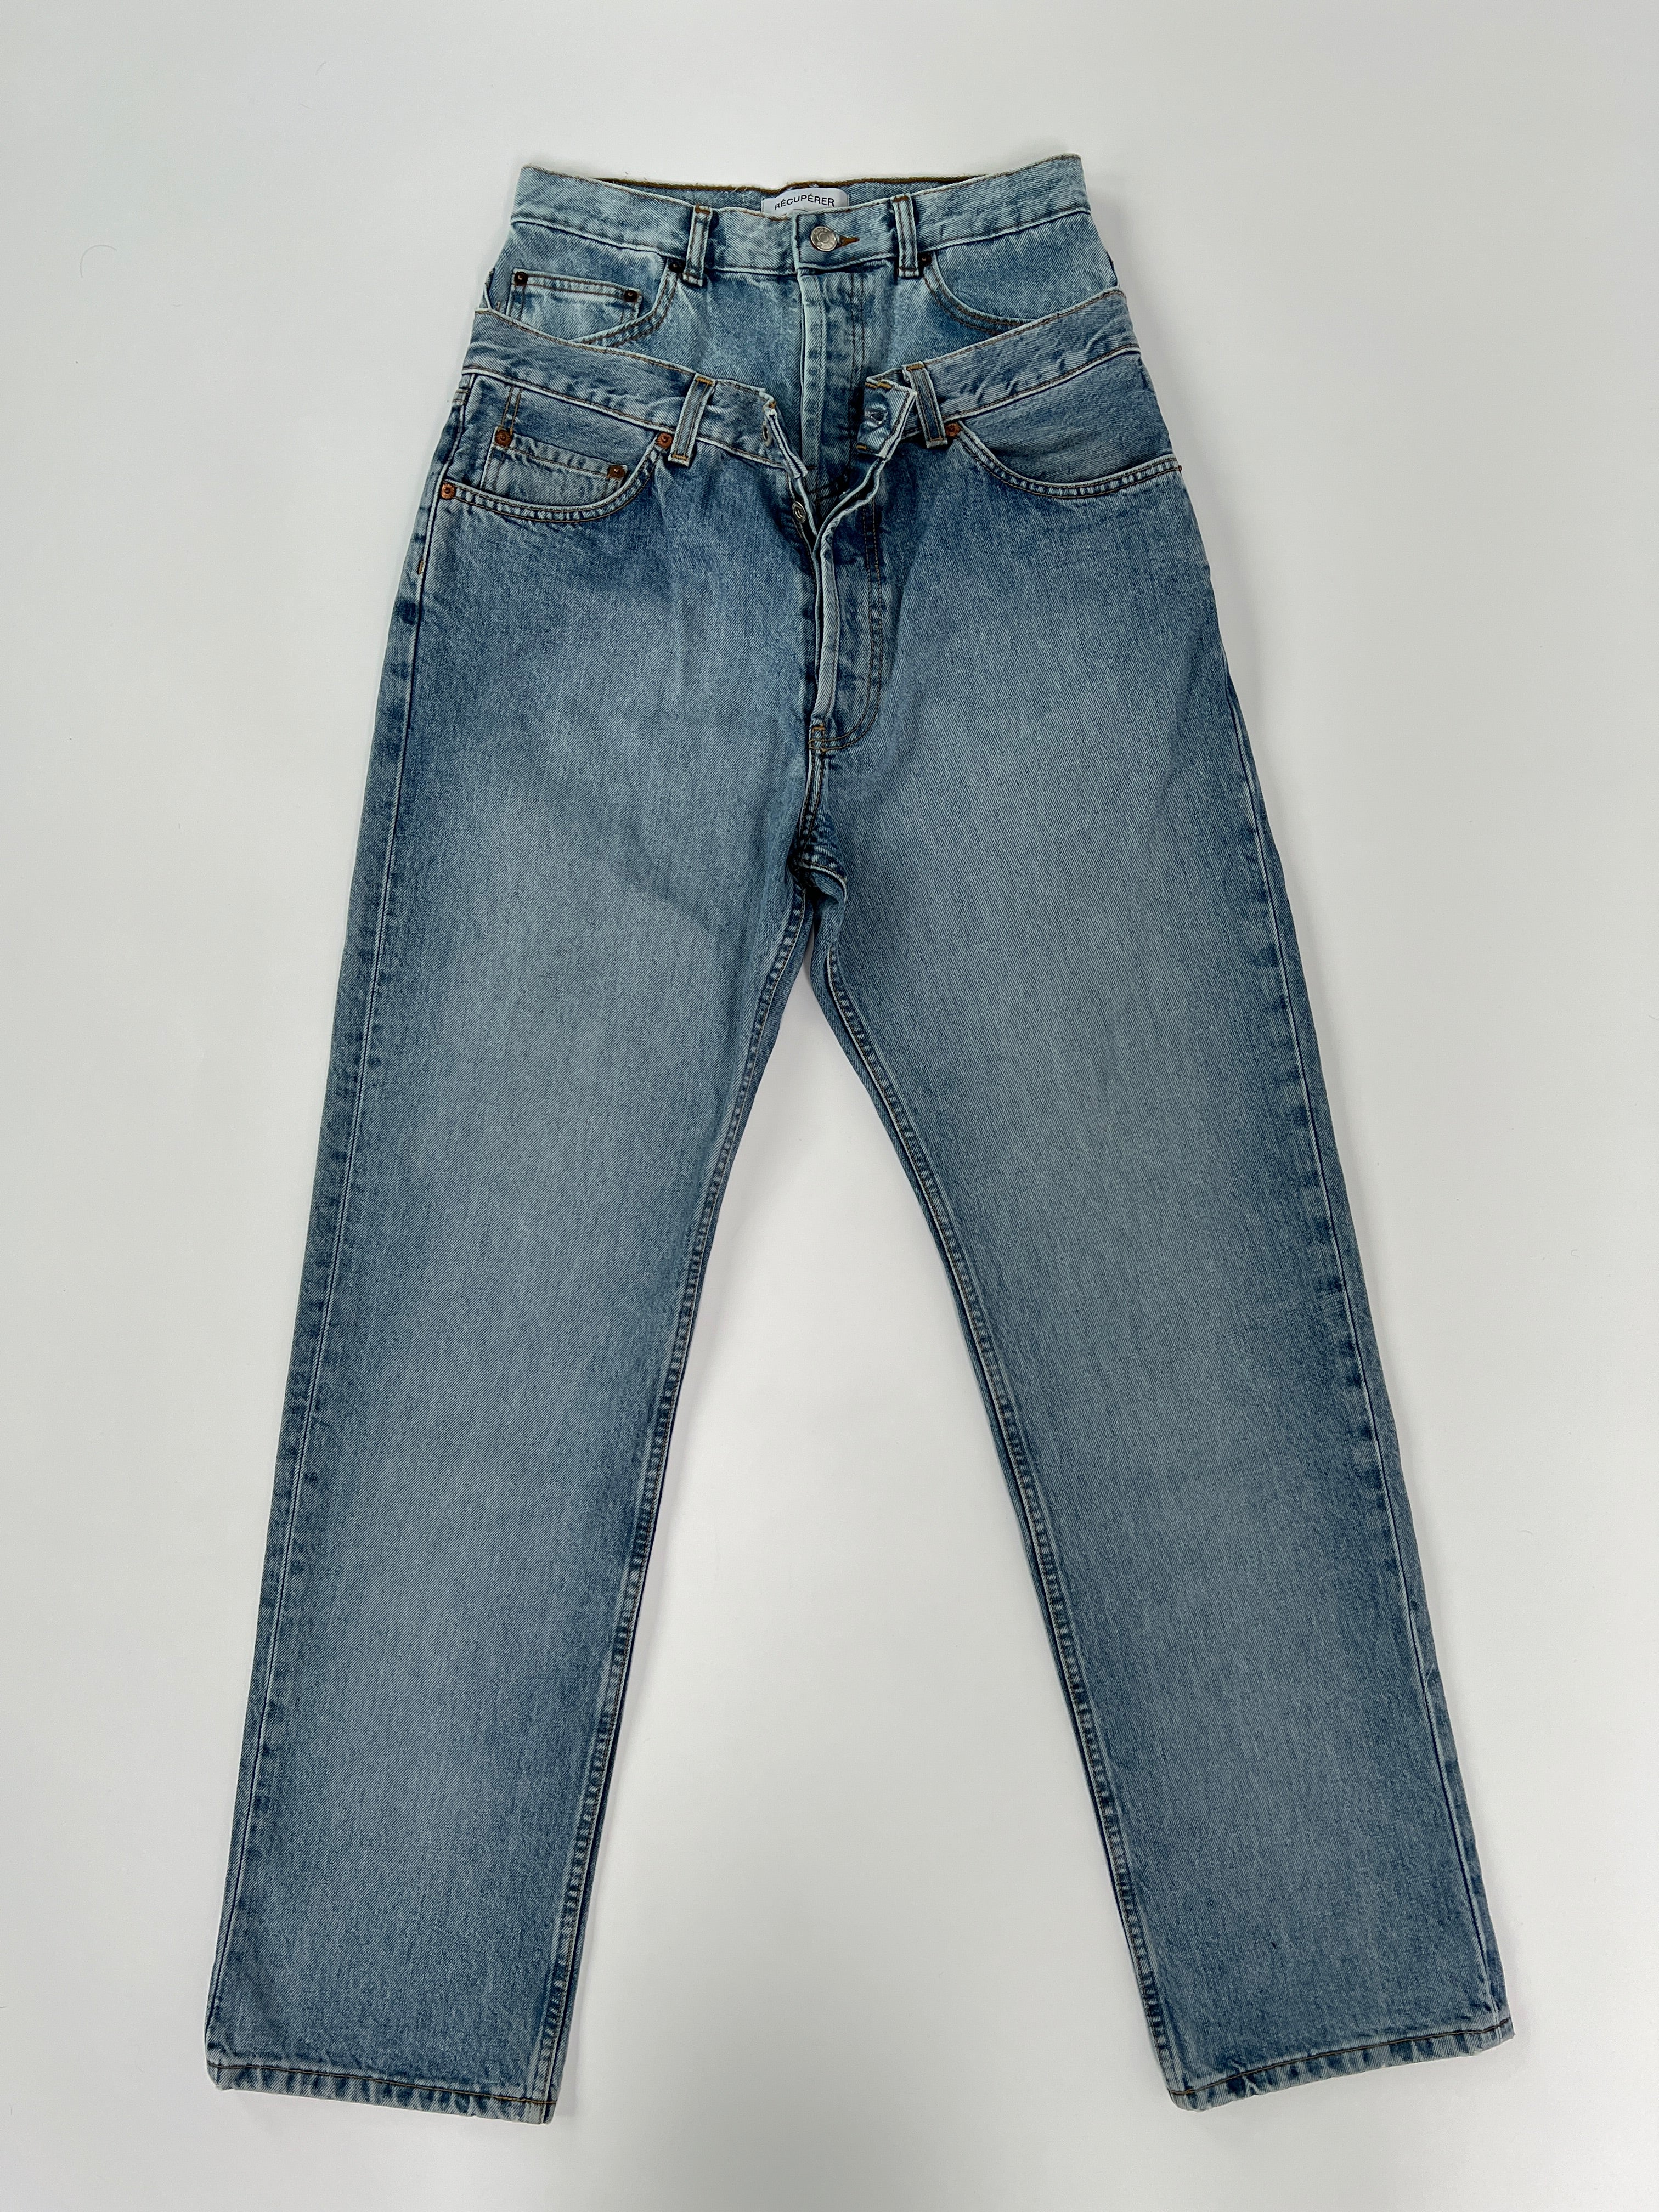 2IN1 JEANS - SIZE M